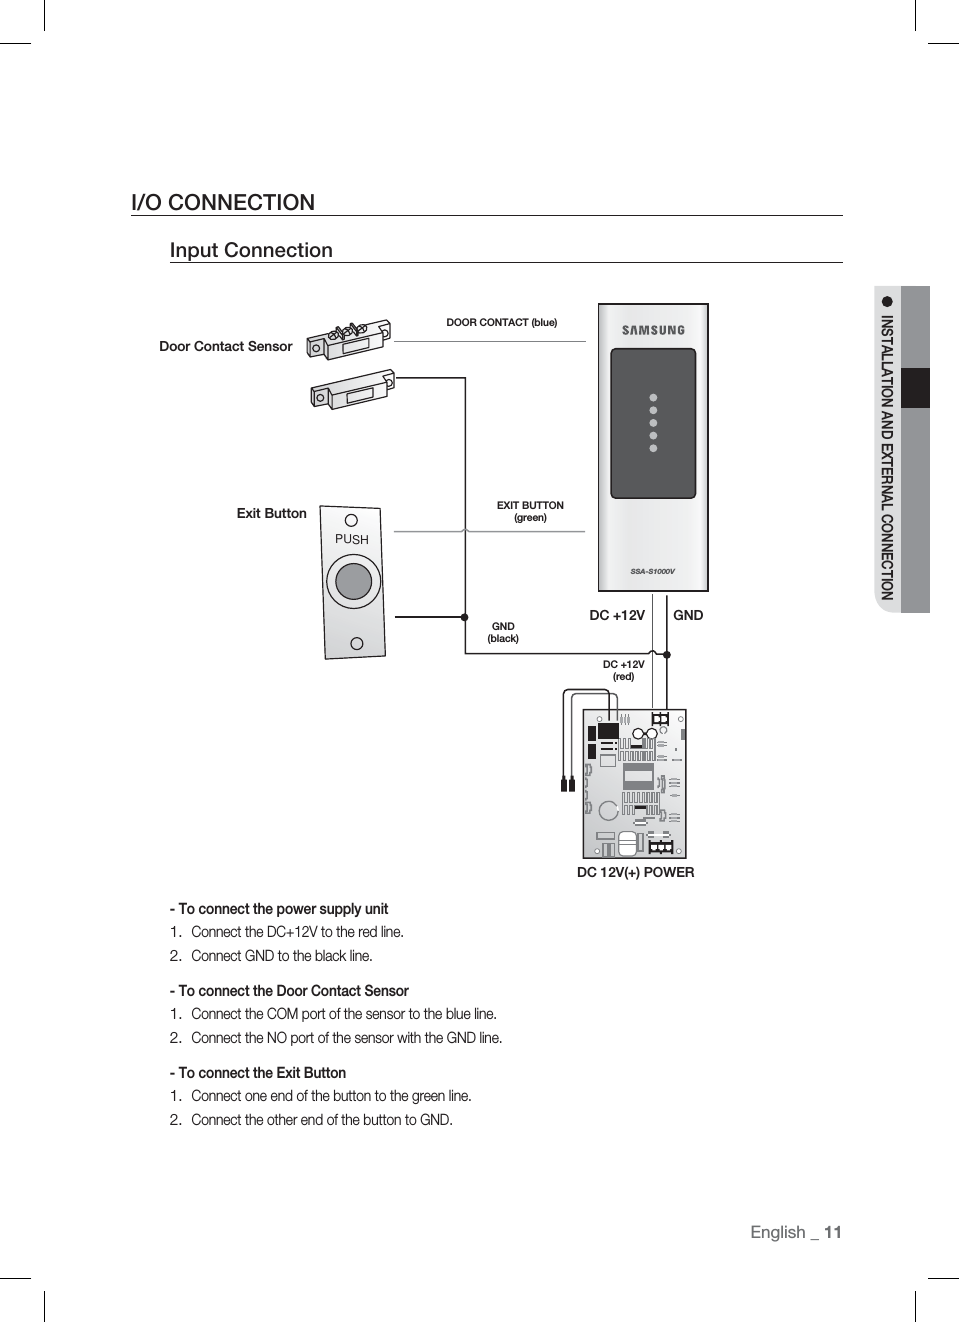 English English _ 11INSTALLATION AND EXTERNAL CONNECTIONI/O CONNECTIONInput Connection- To connect the power supply unitConnect the DC+12V to the red line.Connect GND to the black line.- To connect the Door Contact SensorConnect the COM port of the sensor to the blue line.Connect the NO port of the sensor with the GND line.- To connect the Exit ButtonConnect one end of the button to the green line.Connect the other end of the button to GND.1.2.1.2.1.2.PUSHSSA-S1000VDOOR CONTACT (blue)EXIT BUTTON (green)GND(black)DC +12V (red)GNDDC +12VDC 12V(+) POWERExit ButtonDoor Contact Sensor